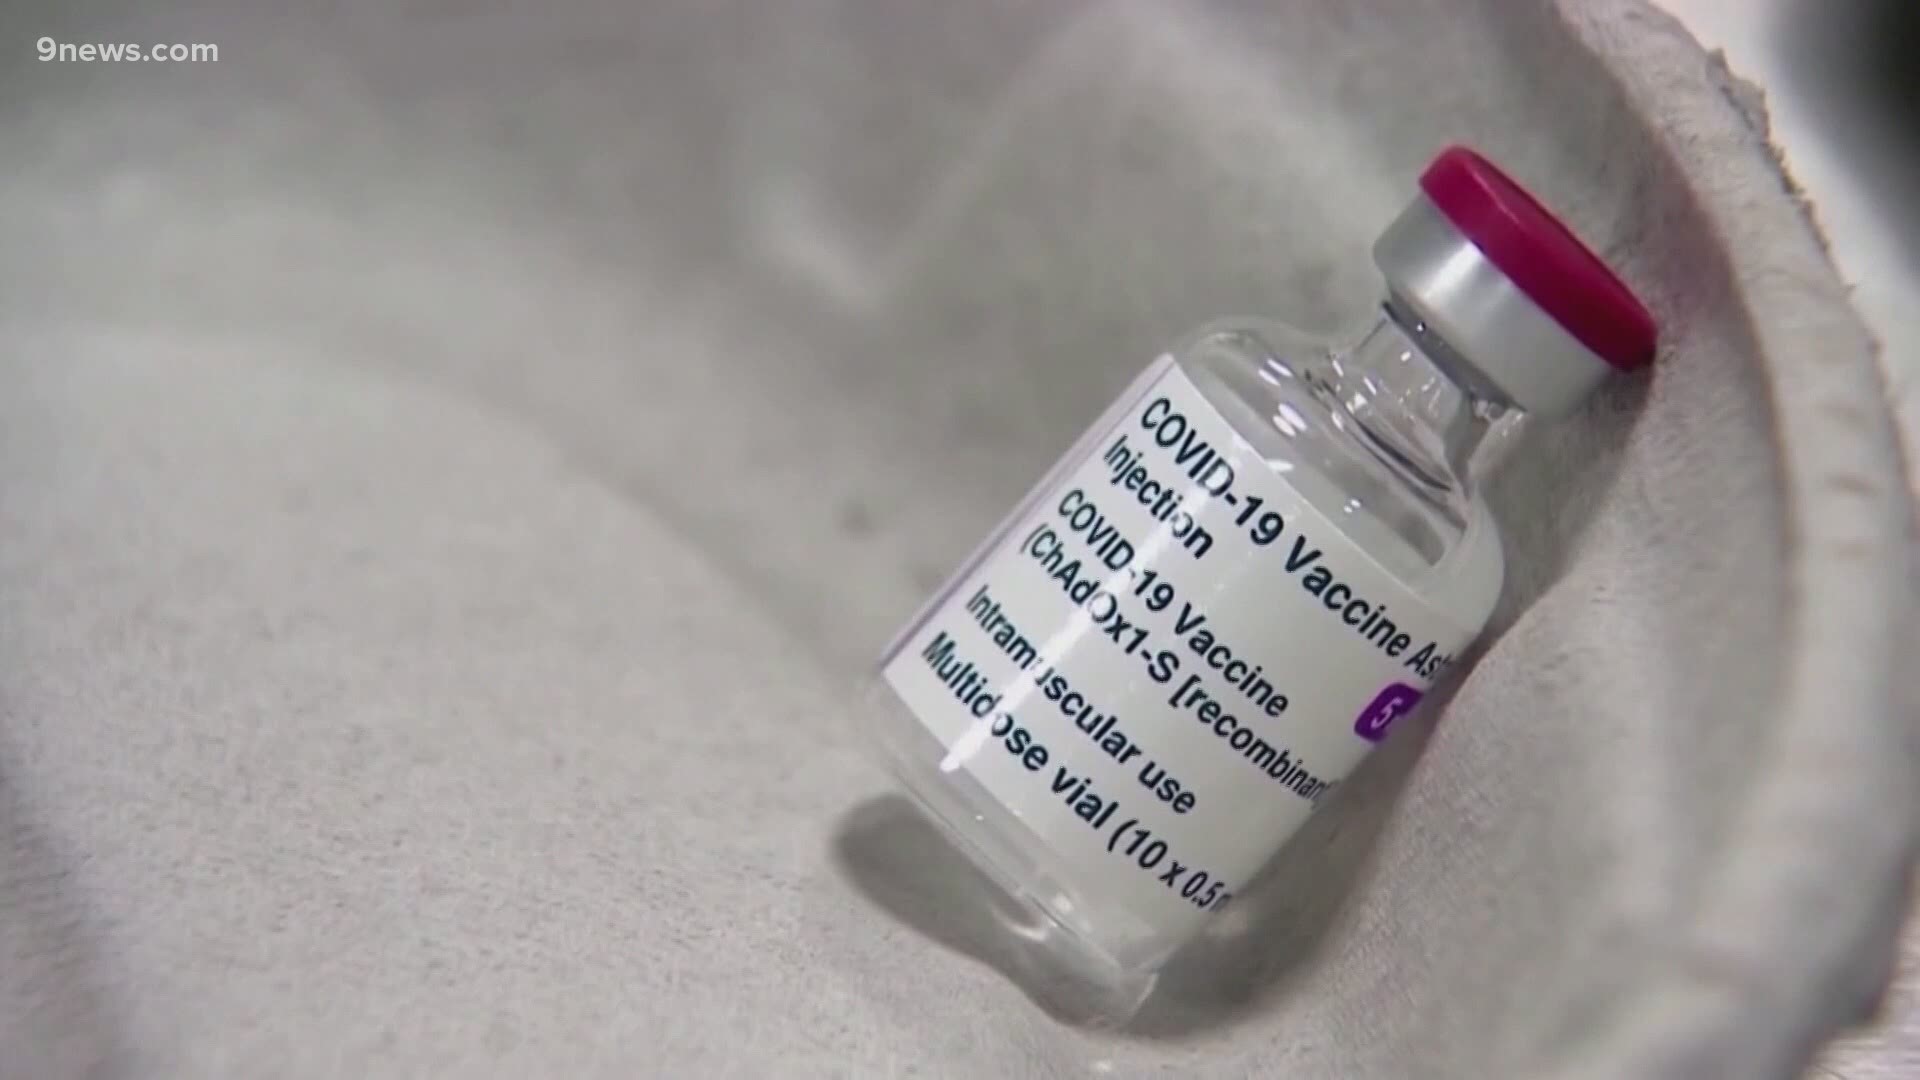 There are now thousands of COVID-19 vaccine doses available in Colorado every day, with the challenge shifting to making sure enough people show up to get them.